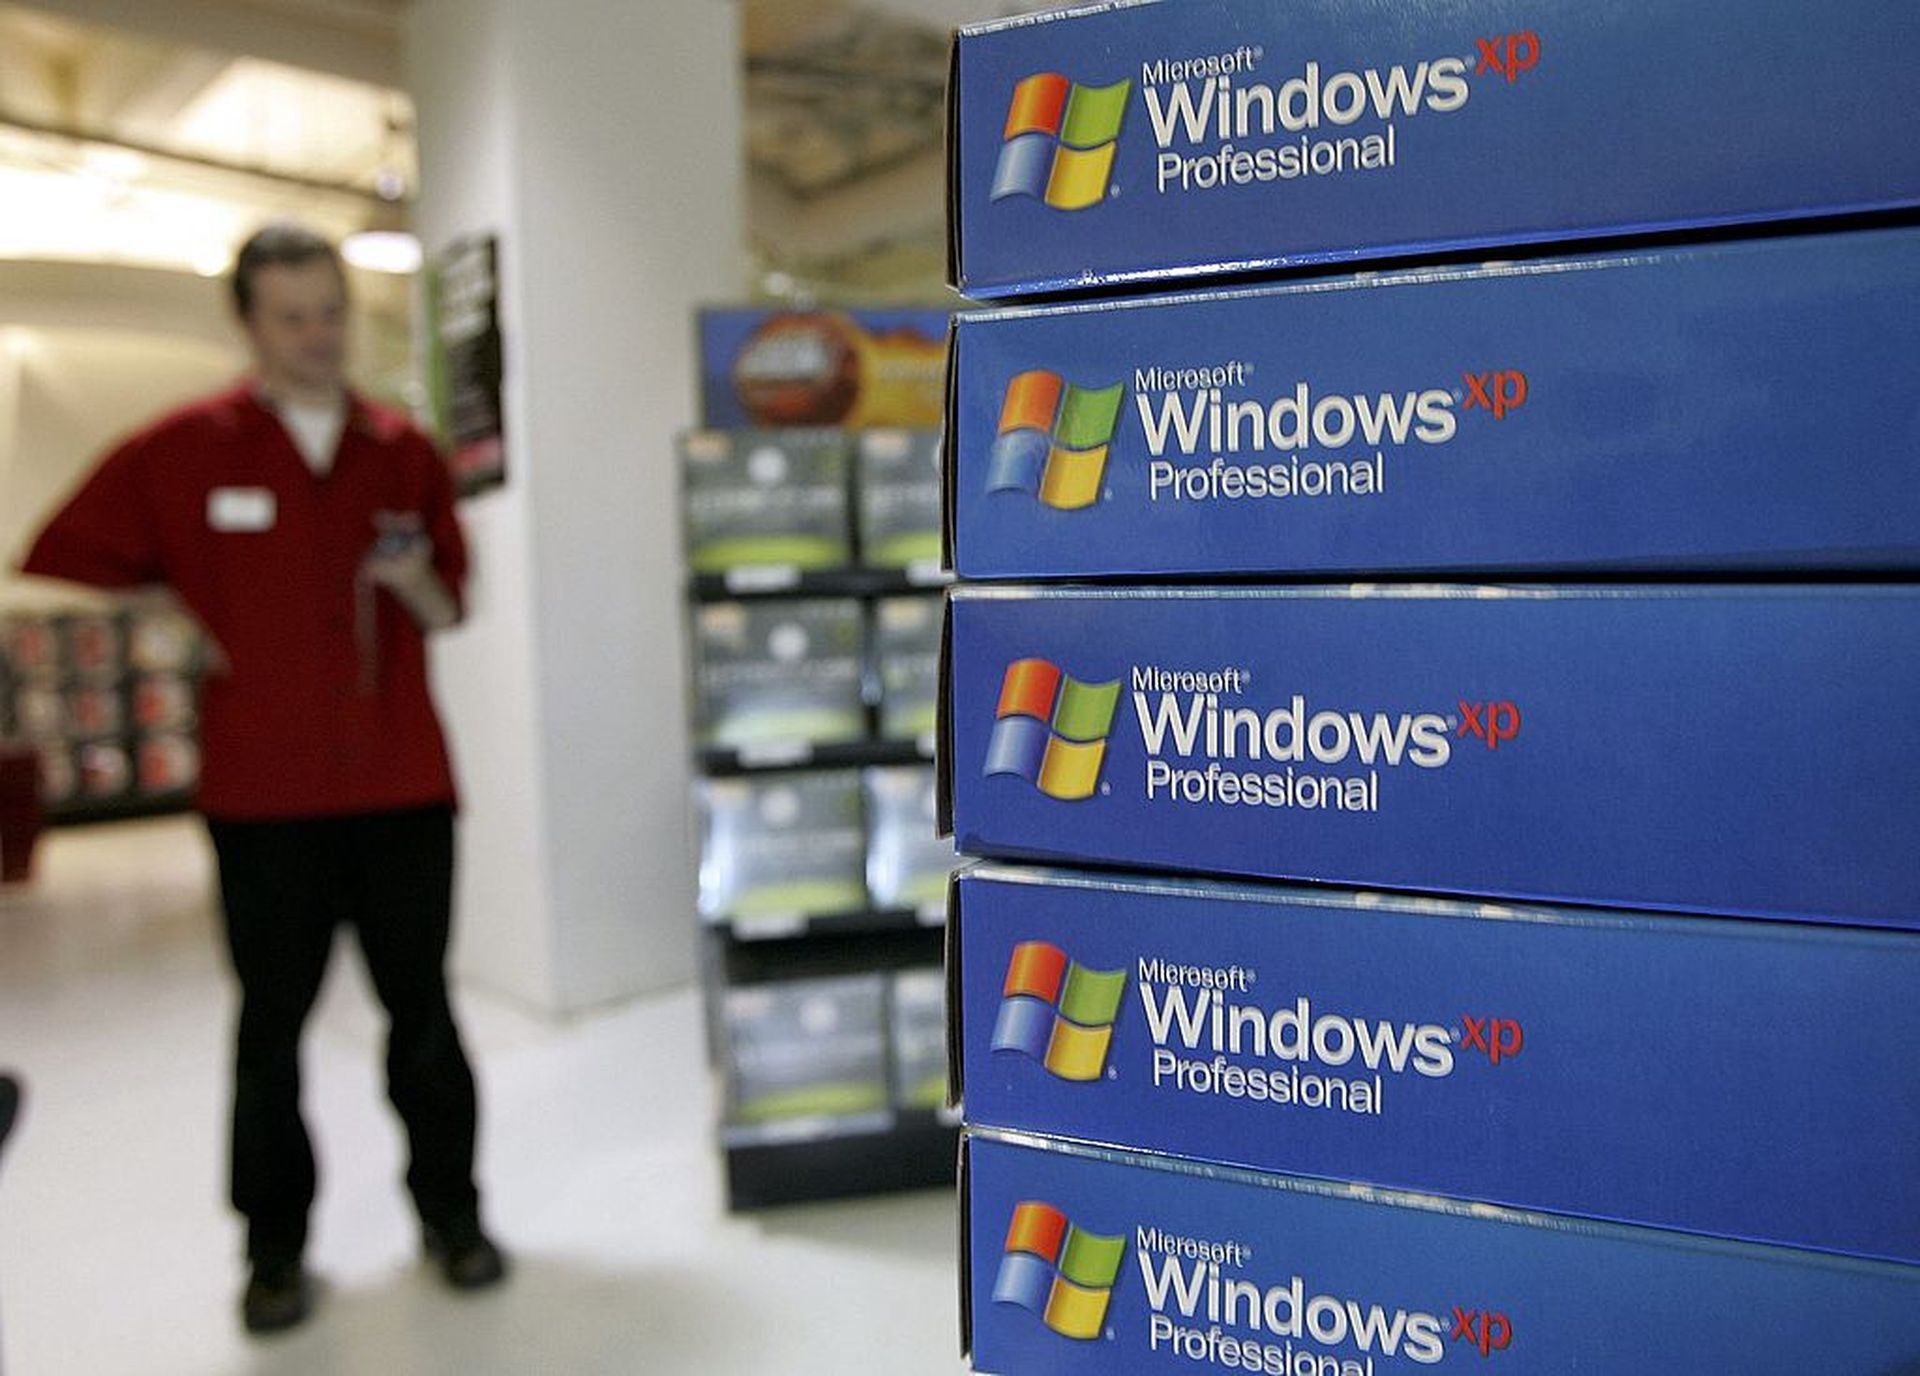 Many healthcare provider organizations continue to rely on outdated, unsupported, legacy technology like Windows XP, which poses critical risks to the enterprise. Pictured: A CompUSA sales associate stands near a display of Microsoft Windows XP software March 22, 2006, in San Francisco. (Photo by Justin Sullivan/Getty Images)